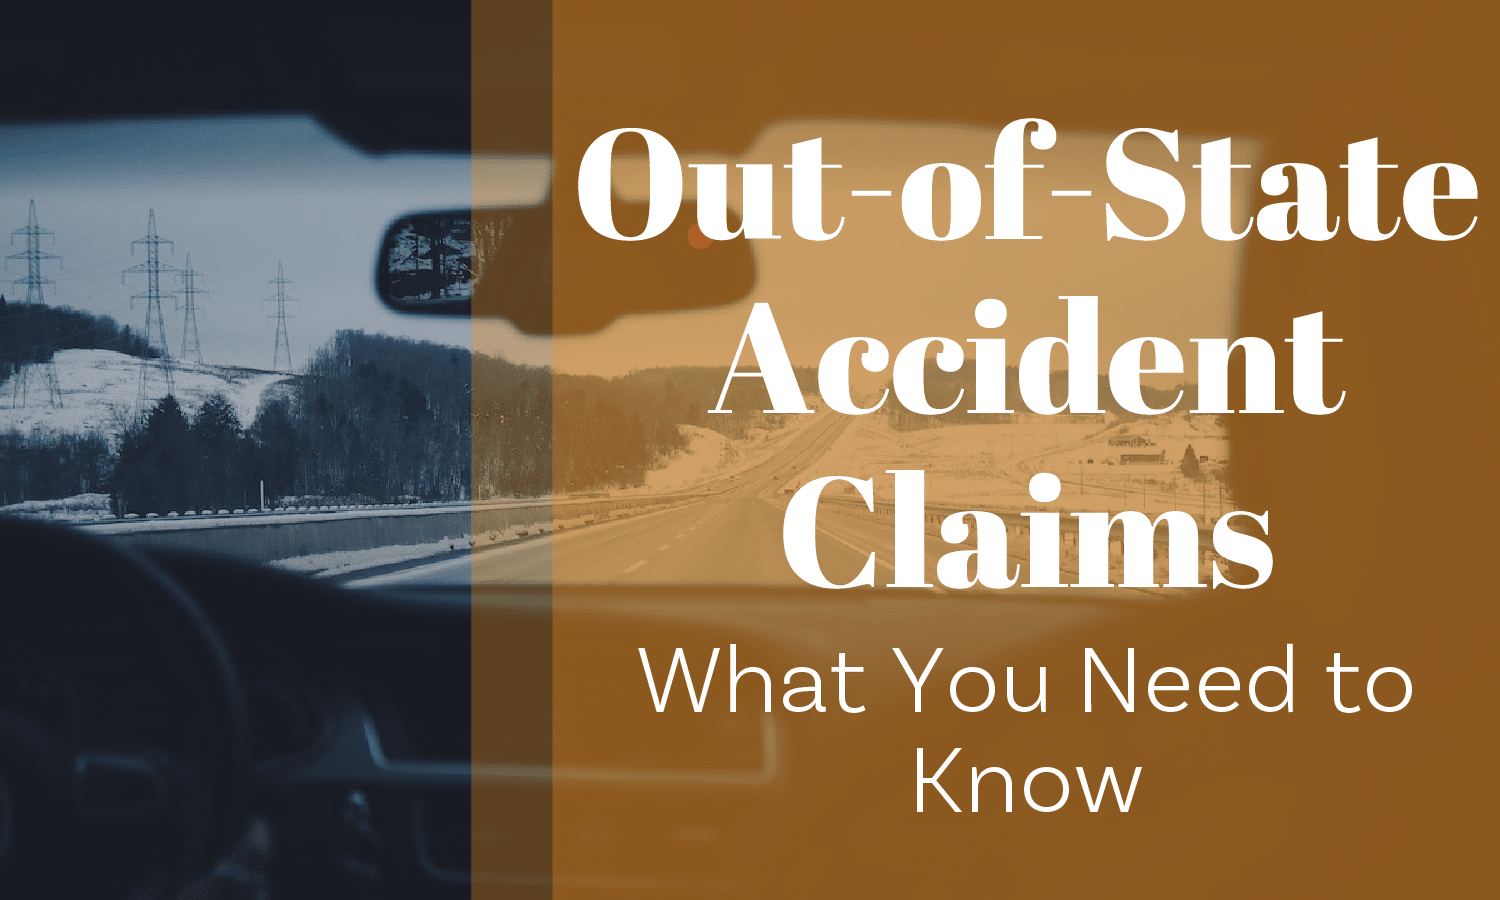 Out-of-State Accident Claims: What You Need to Know